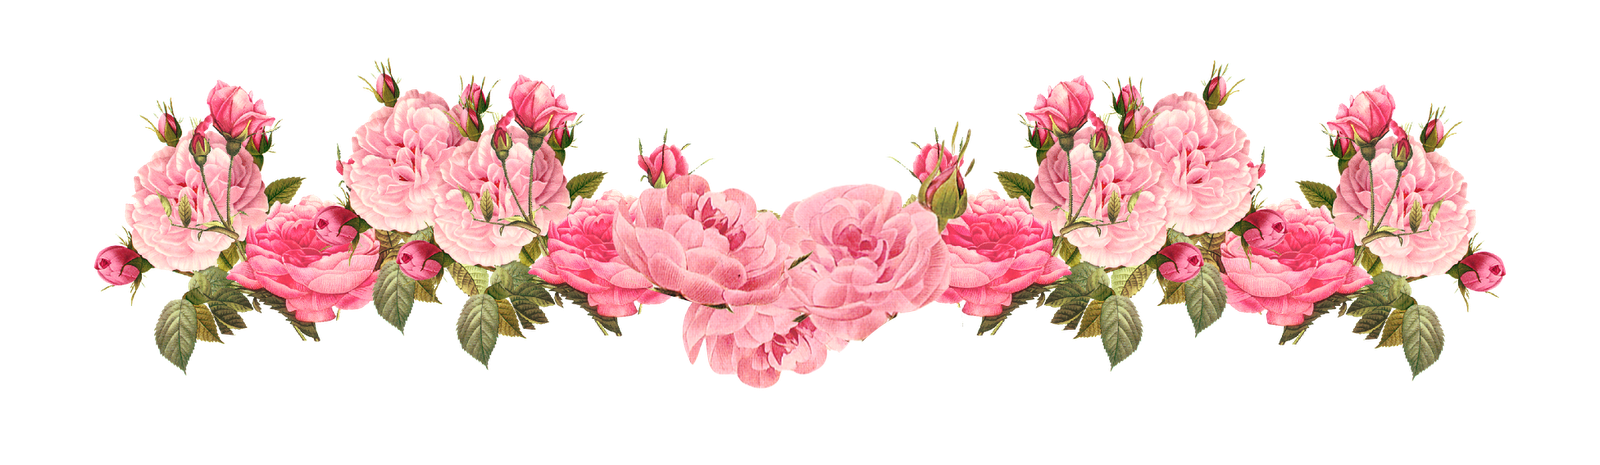 Image   Free Vintage Rose Borders Vintage  Roses Scrapbooking Embellishment Uupoyg Clipart.png | Animal Jam Clans Wiki | Fandom Powered By Wikia - Vintage, Transparent background PNG HD thumbnail